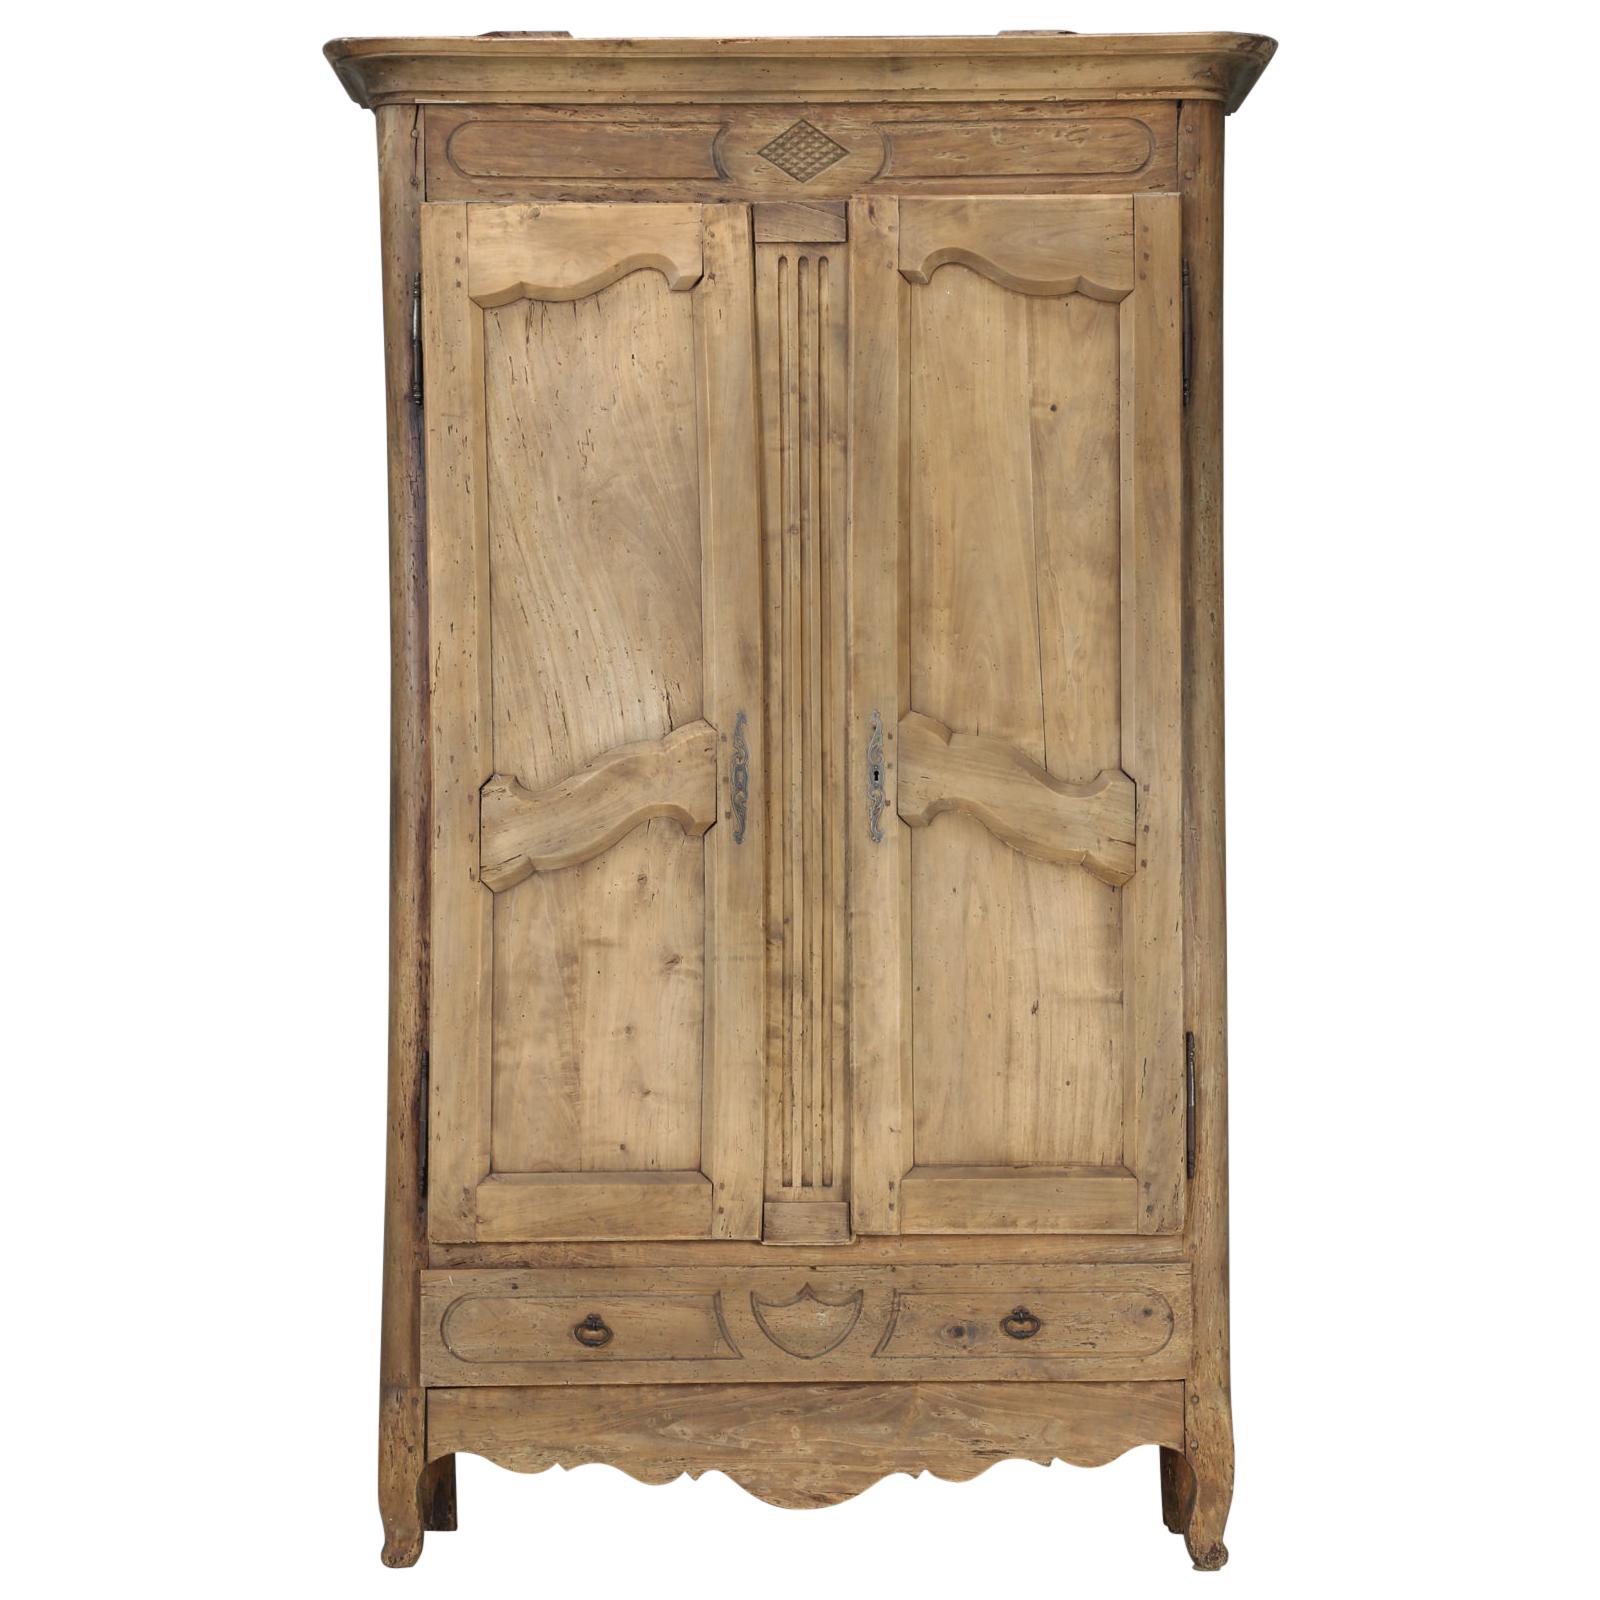 Antique French Armoire Restored, circa 200 Years Old